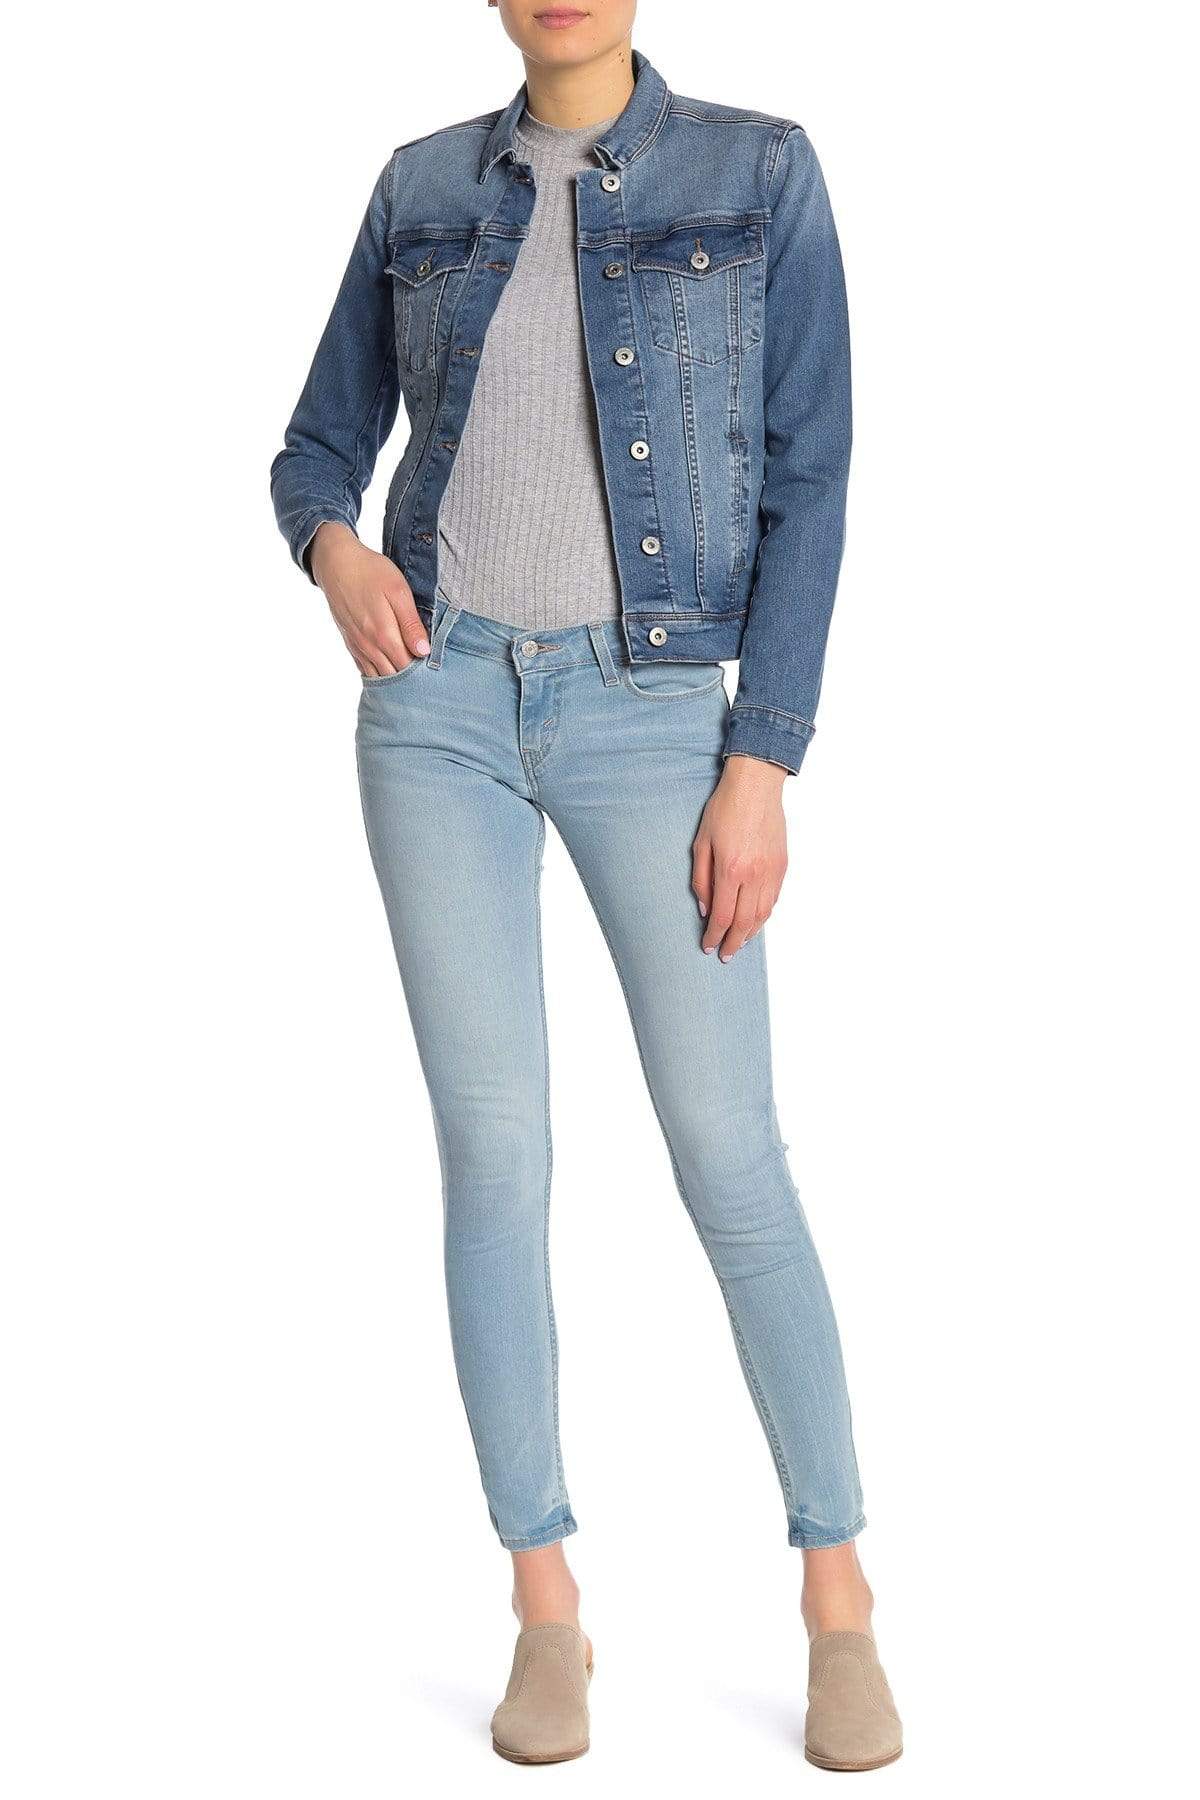 LEVI'S - 535 Super Skinny Leg Low Rise Jeans – Brands and Beyond